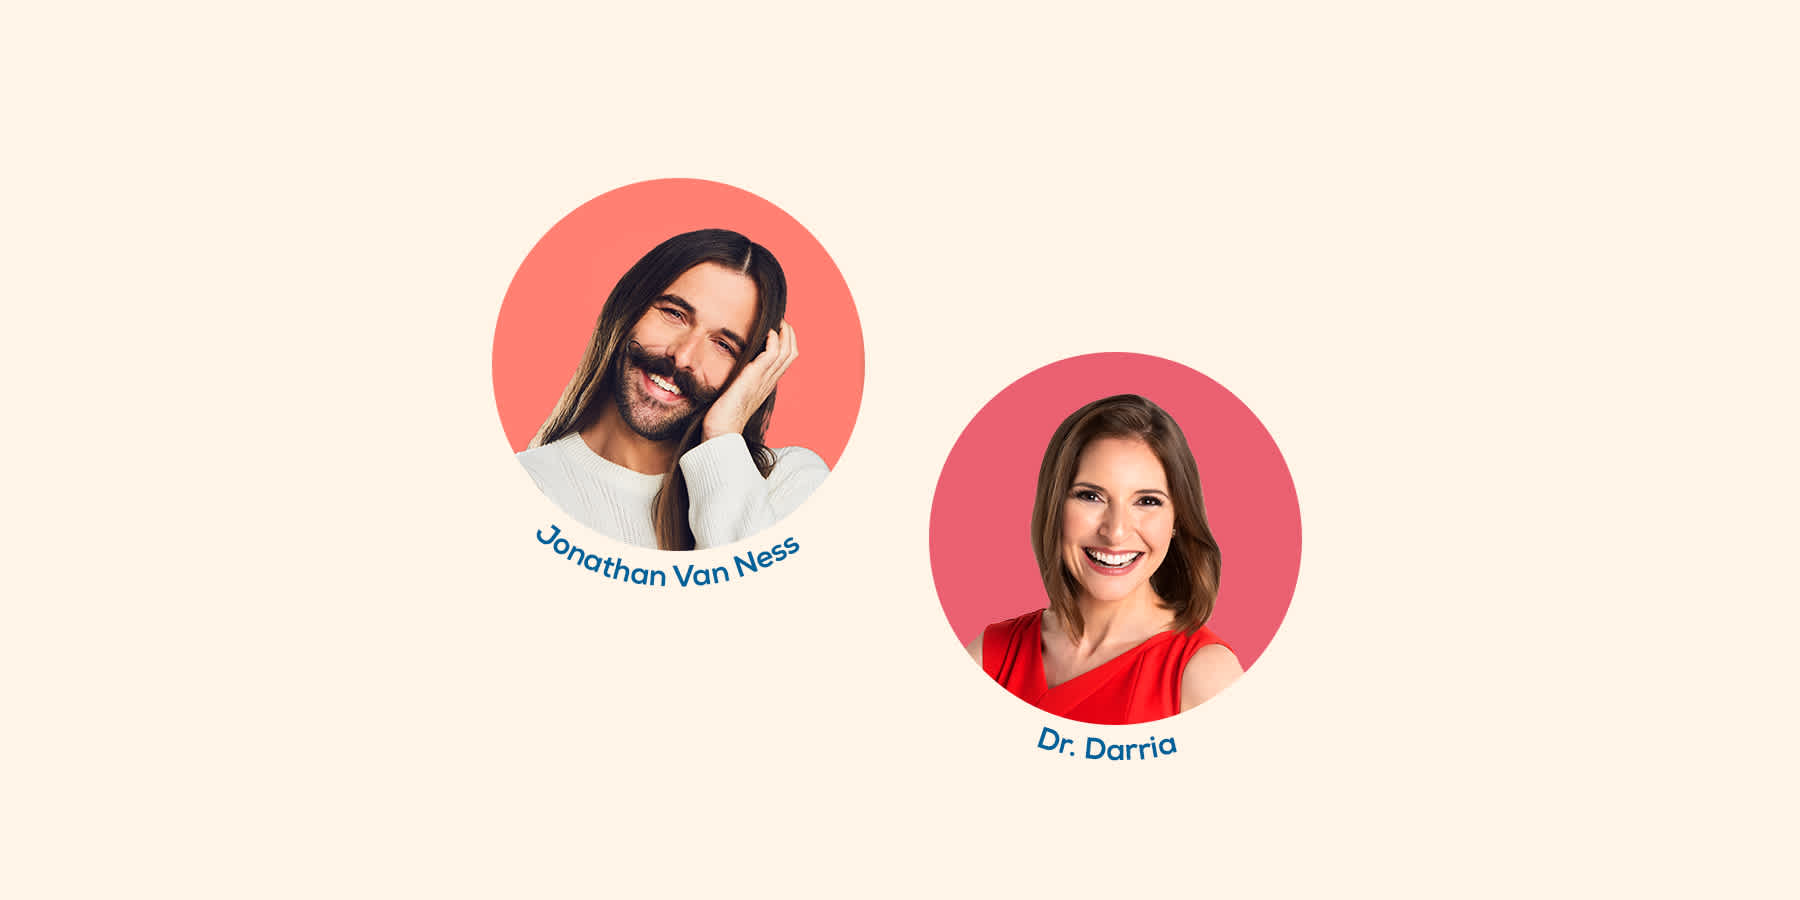 Recap Sex Ed For Grown Ups With Jonathan Van Ness Blog Everlywell Home Health Testing Made 2136